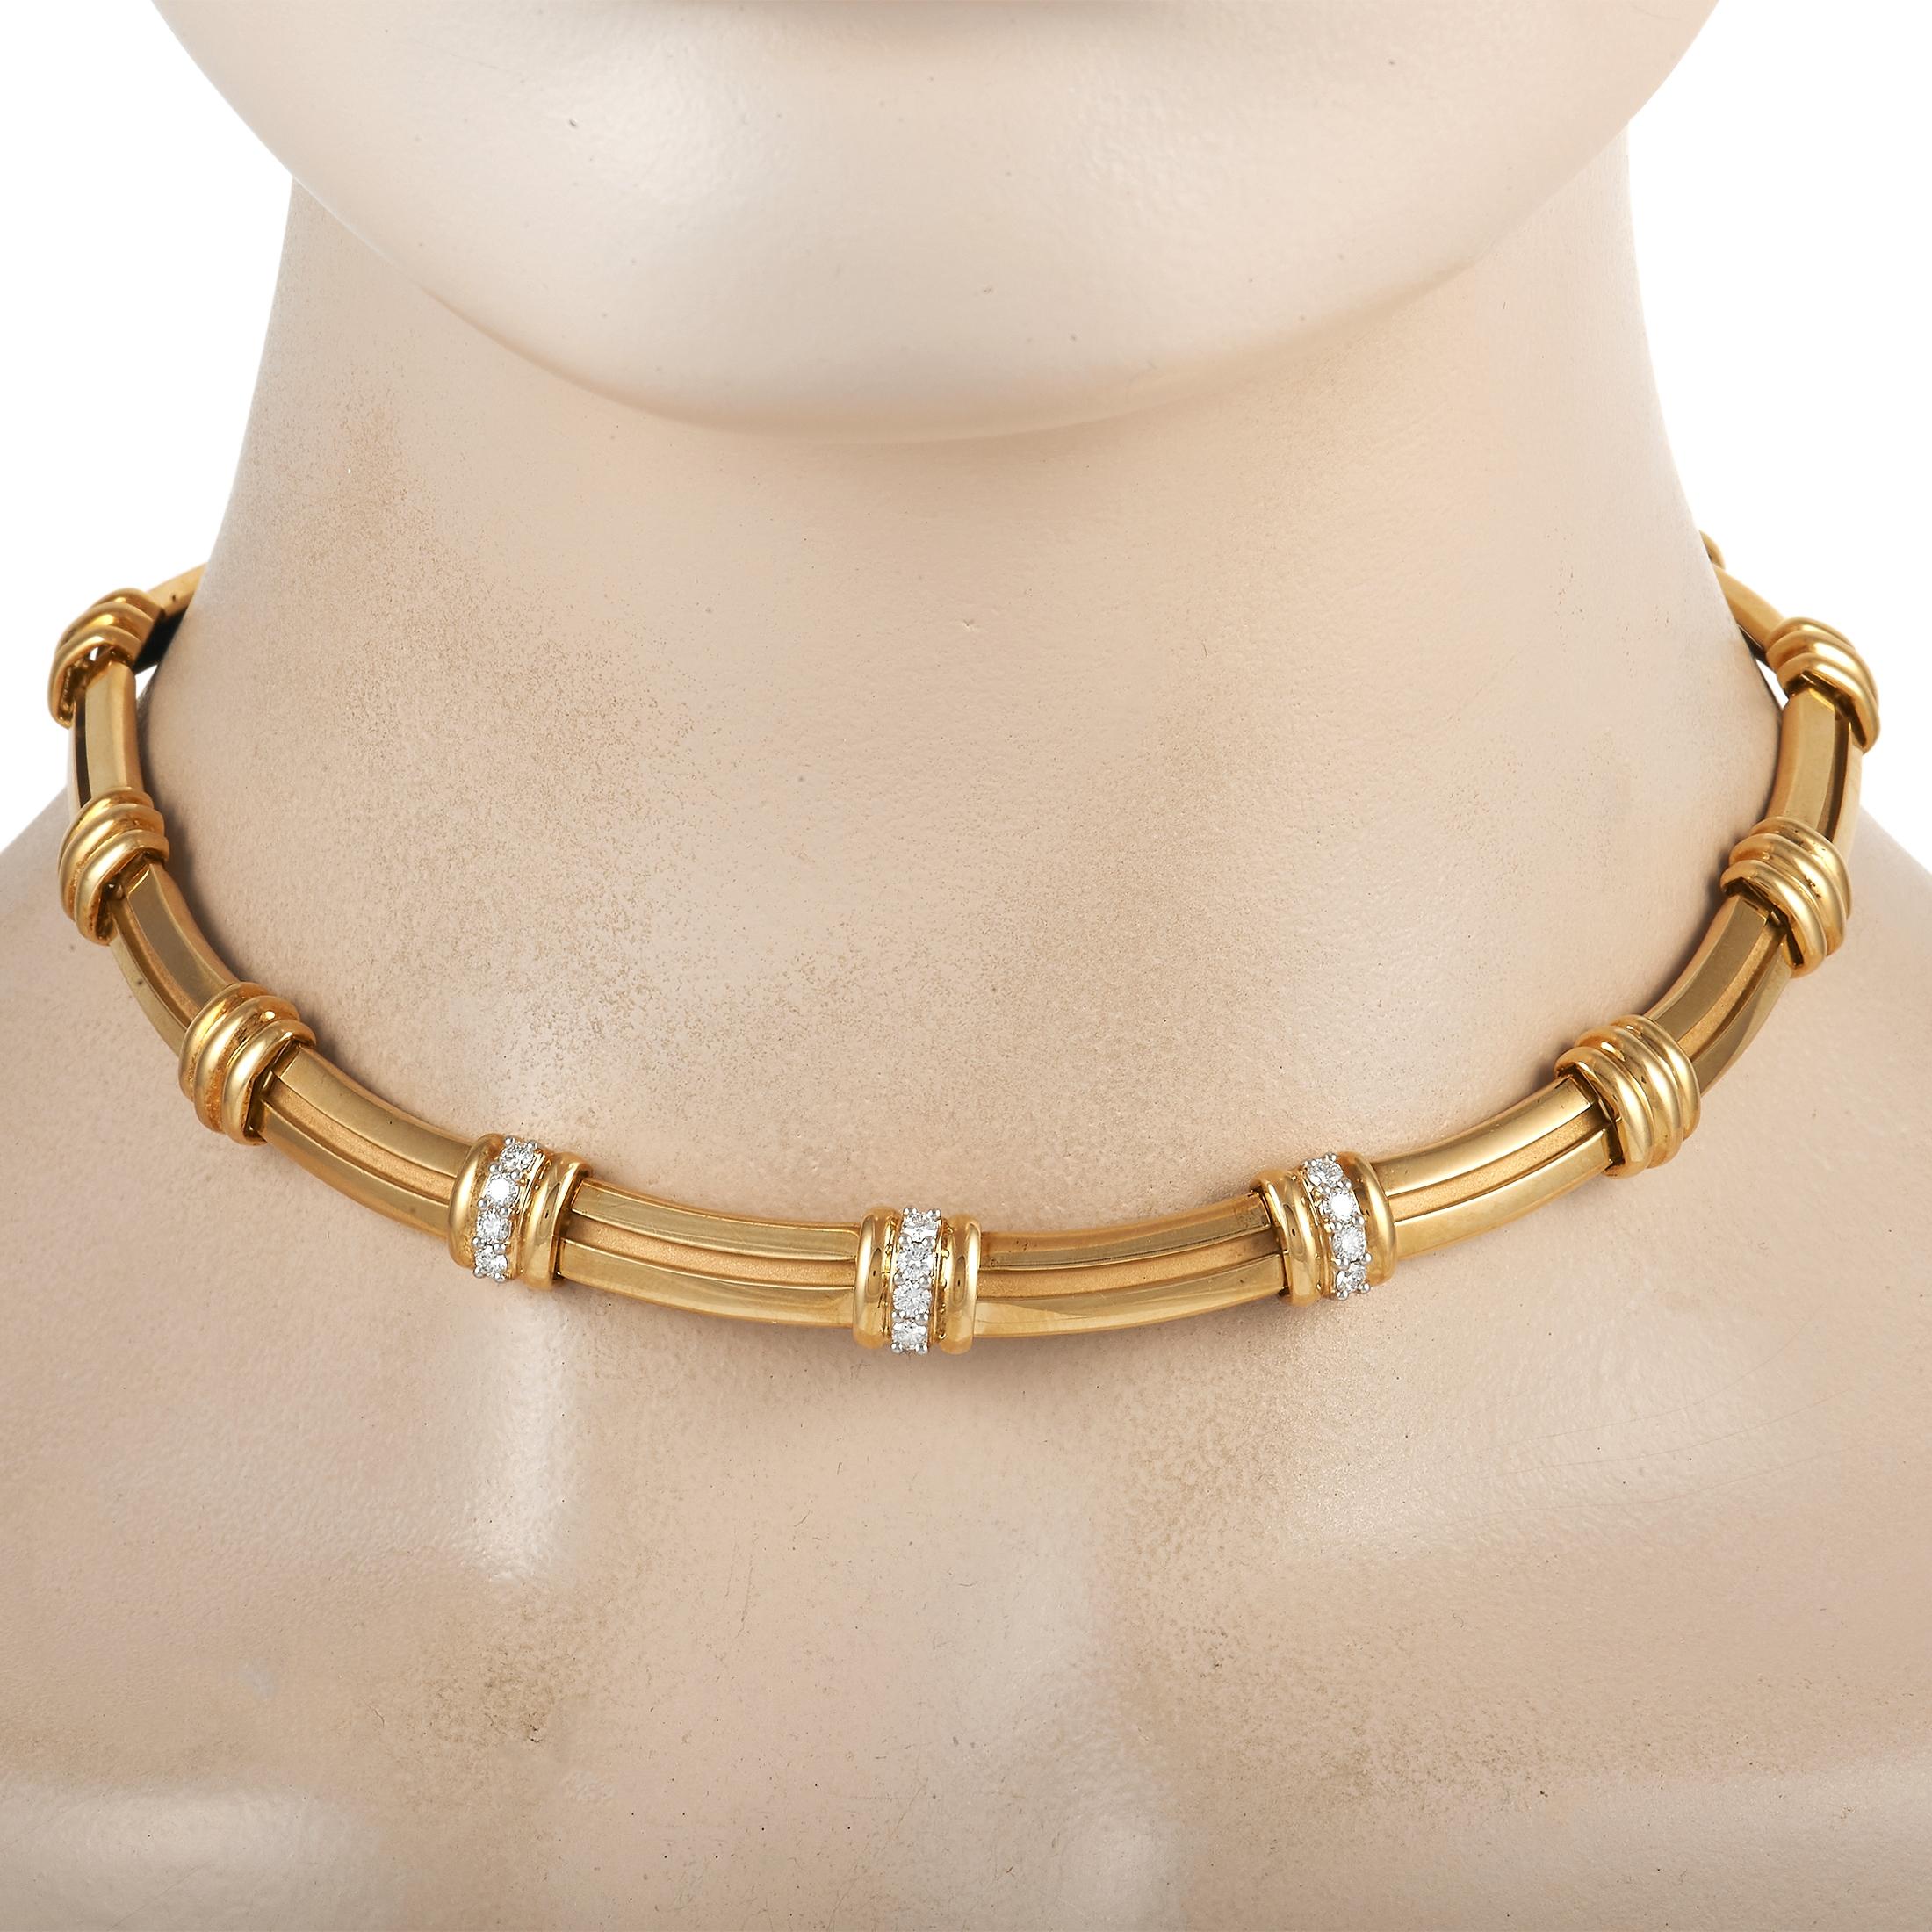 Making a stylish statement is as easy as slipping on this bold, breathtaking Tiffany & Co. Atlas necklace. A 14” long design crafted entirely from 18K Yellow Gold, the central links are accented by glittering diamonds with a total weight of 0.95